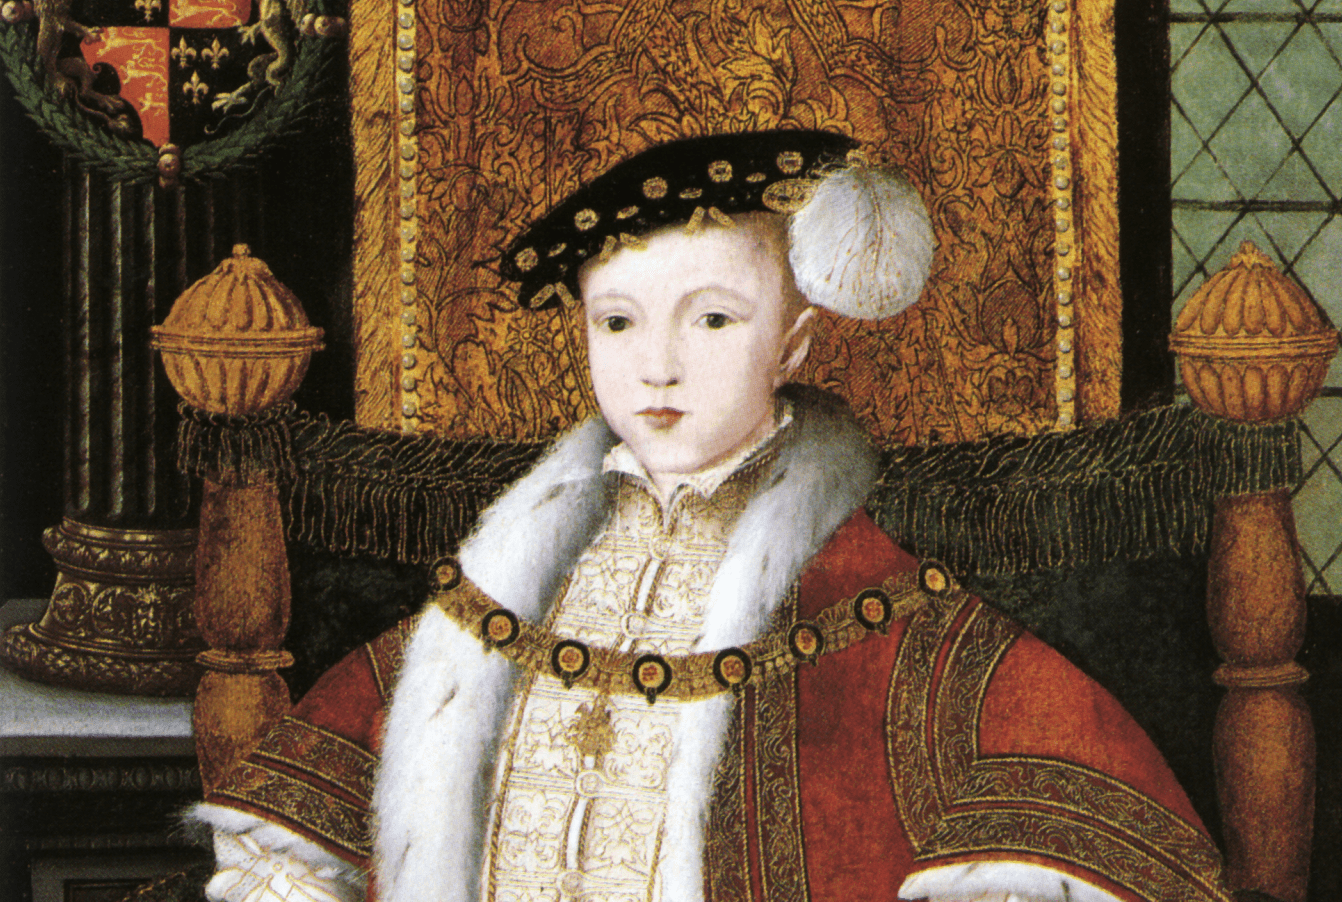 <p>In 1549, a failed plot to hold captive 11-year-old King Edward VI of England resulted in only two casualties. The first: the king’s precious dog, who was hurt by the young king’s own uncle, Thomas Seymour. The second: Seymour himself, who was executed for trying to abduct the boy-king in a seizure of power against his brother. Seymour went down for 33 charges for treason, which I’m sure included royal animal brutality-related acts.</p>